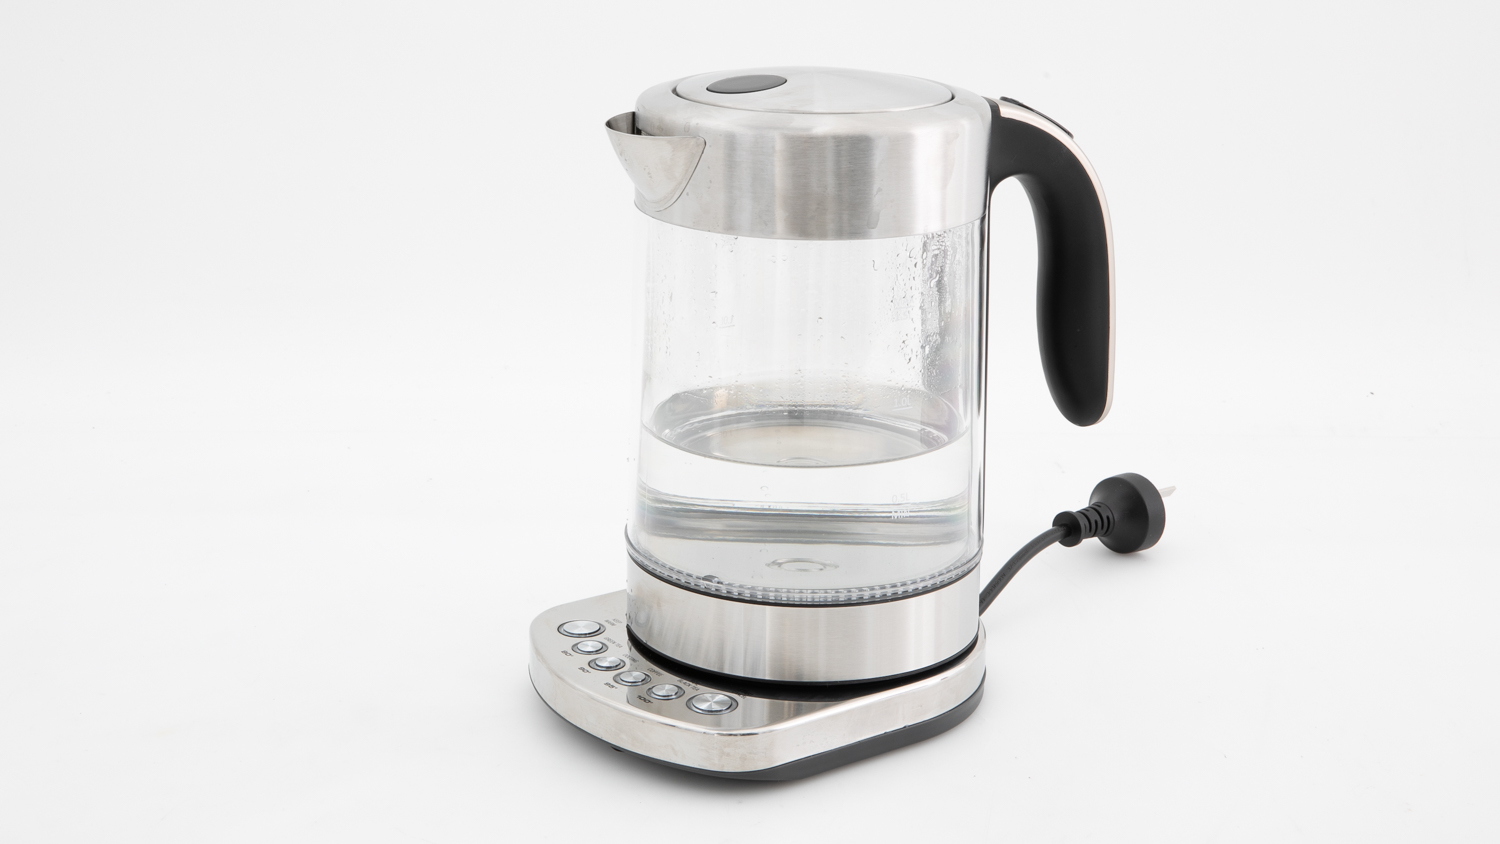 Kmart Clear Variable Temperature Kettle LD-K1045 carousel image